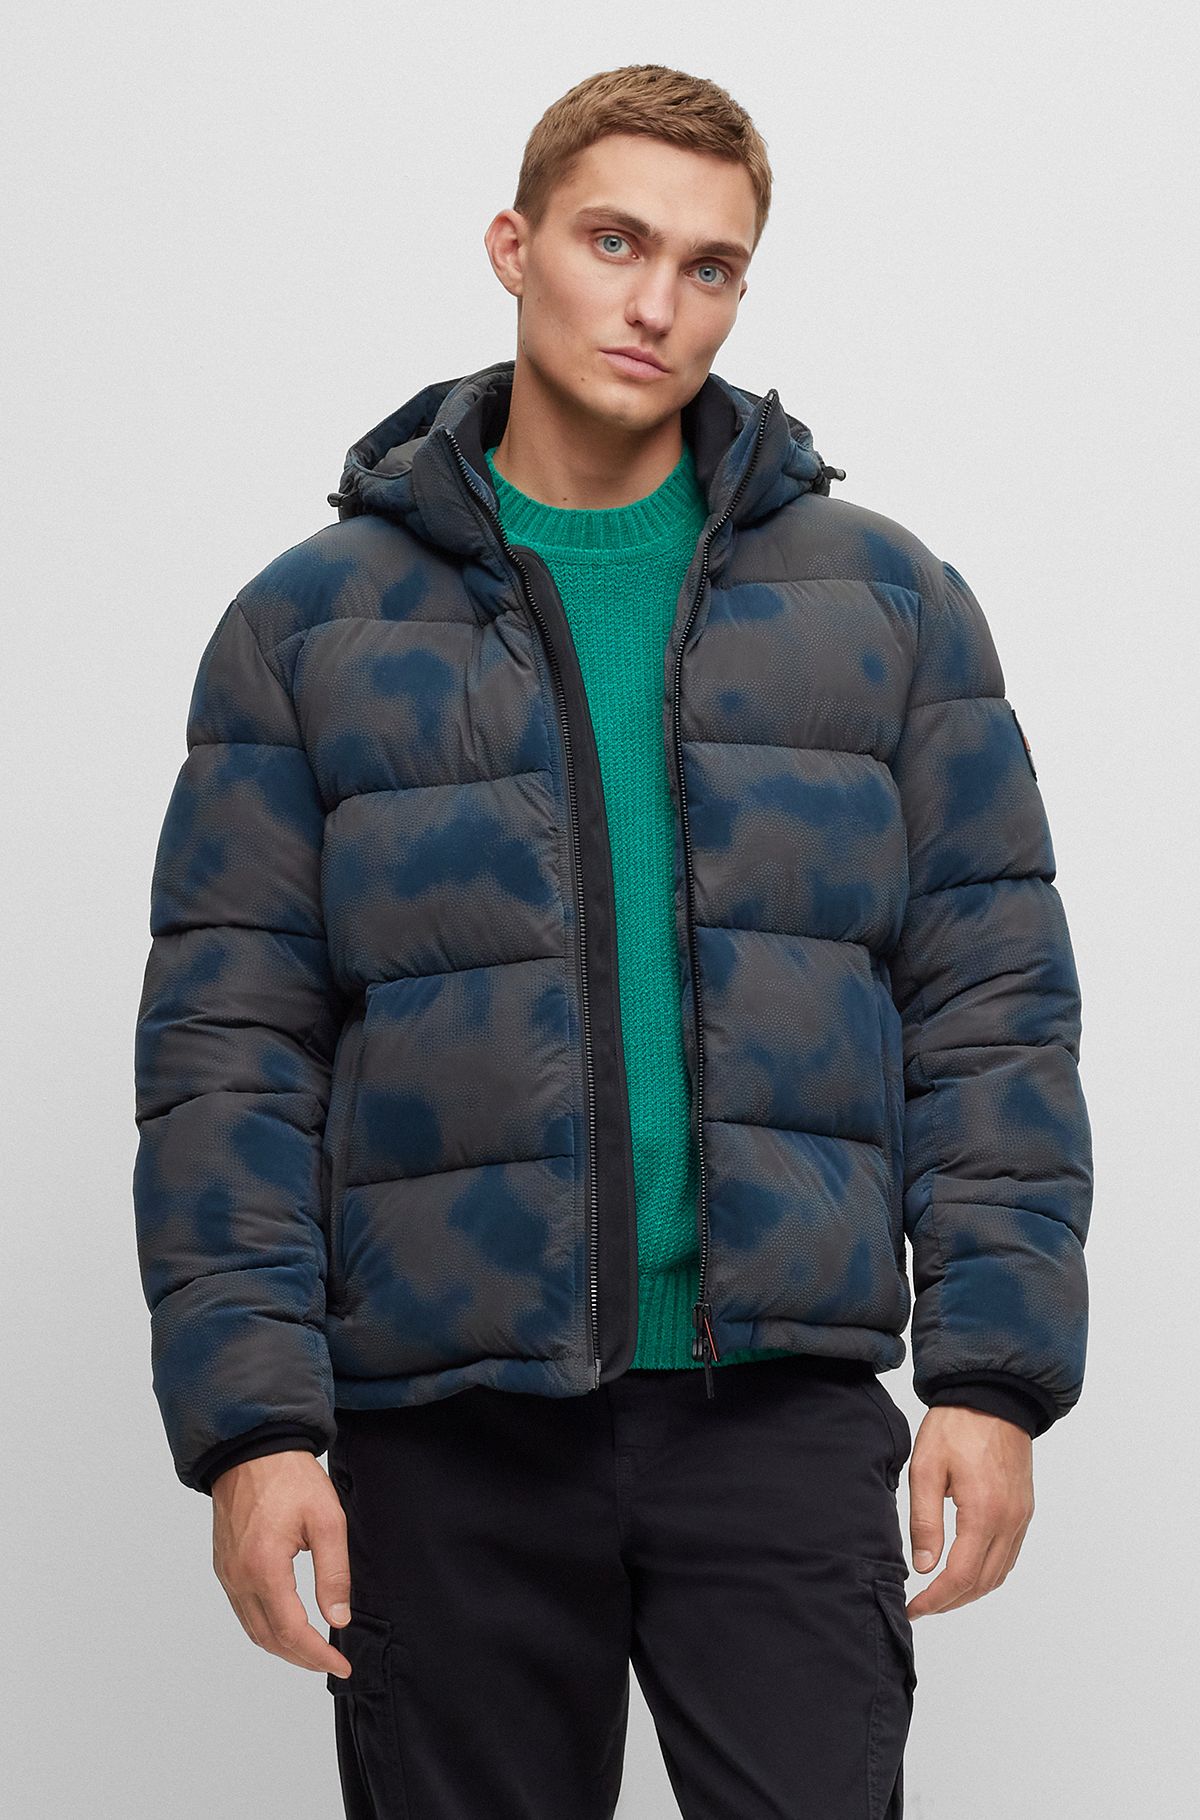 Relaxed-fit puffer jacket with seasonal flock print, Patterned